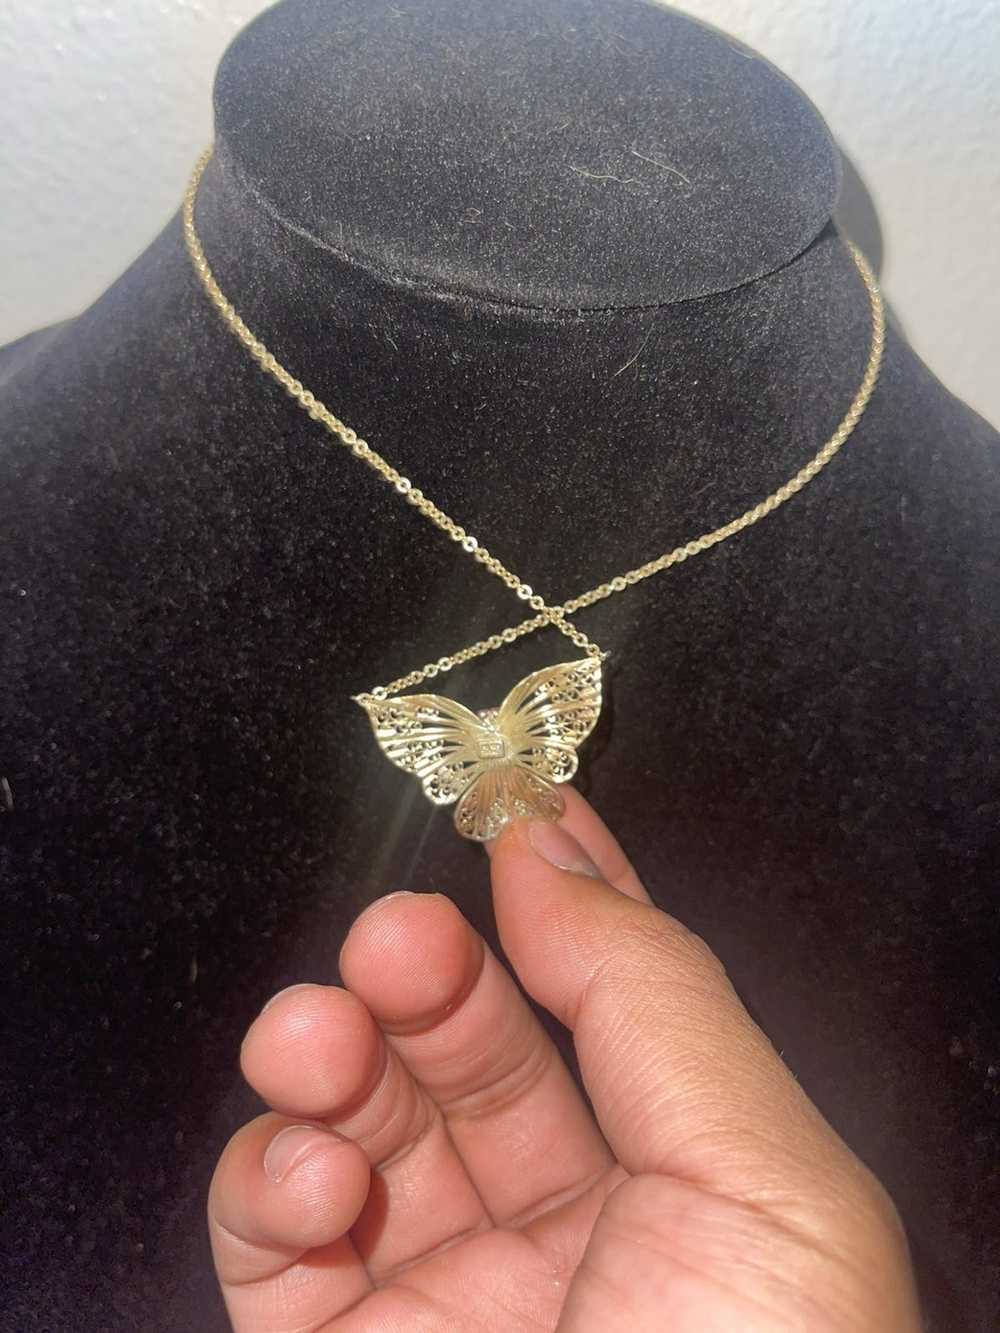 Vintage 14k Tri gold butterfly chain - image 2